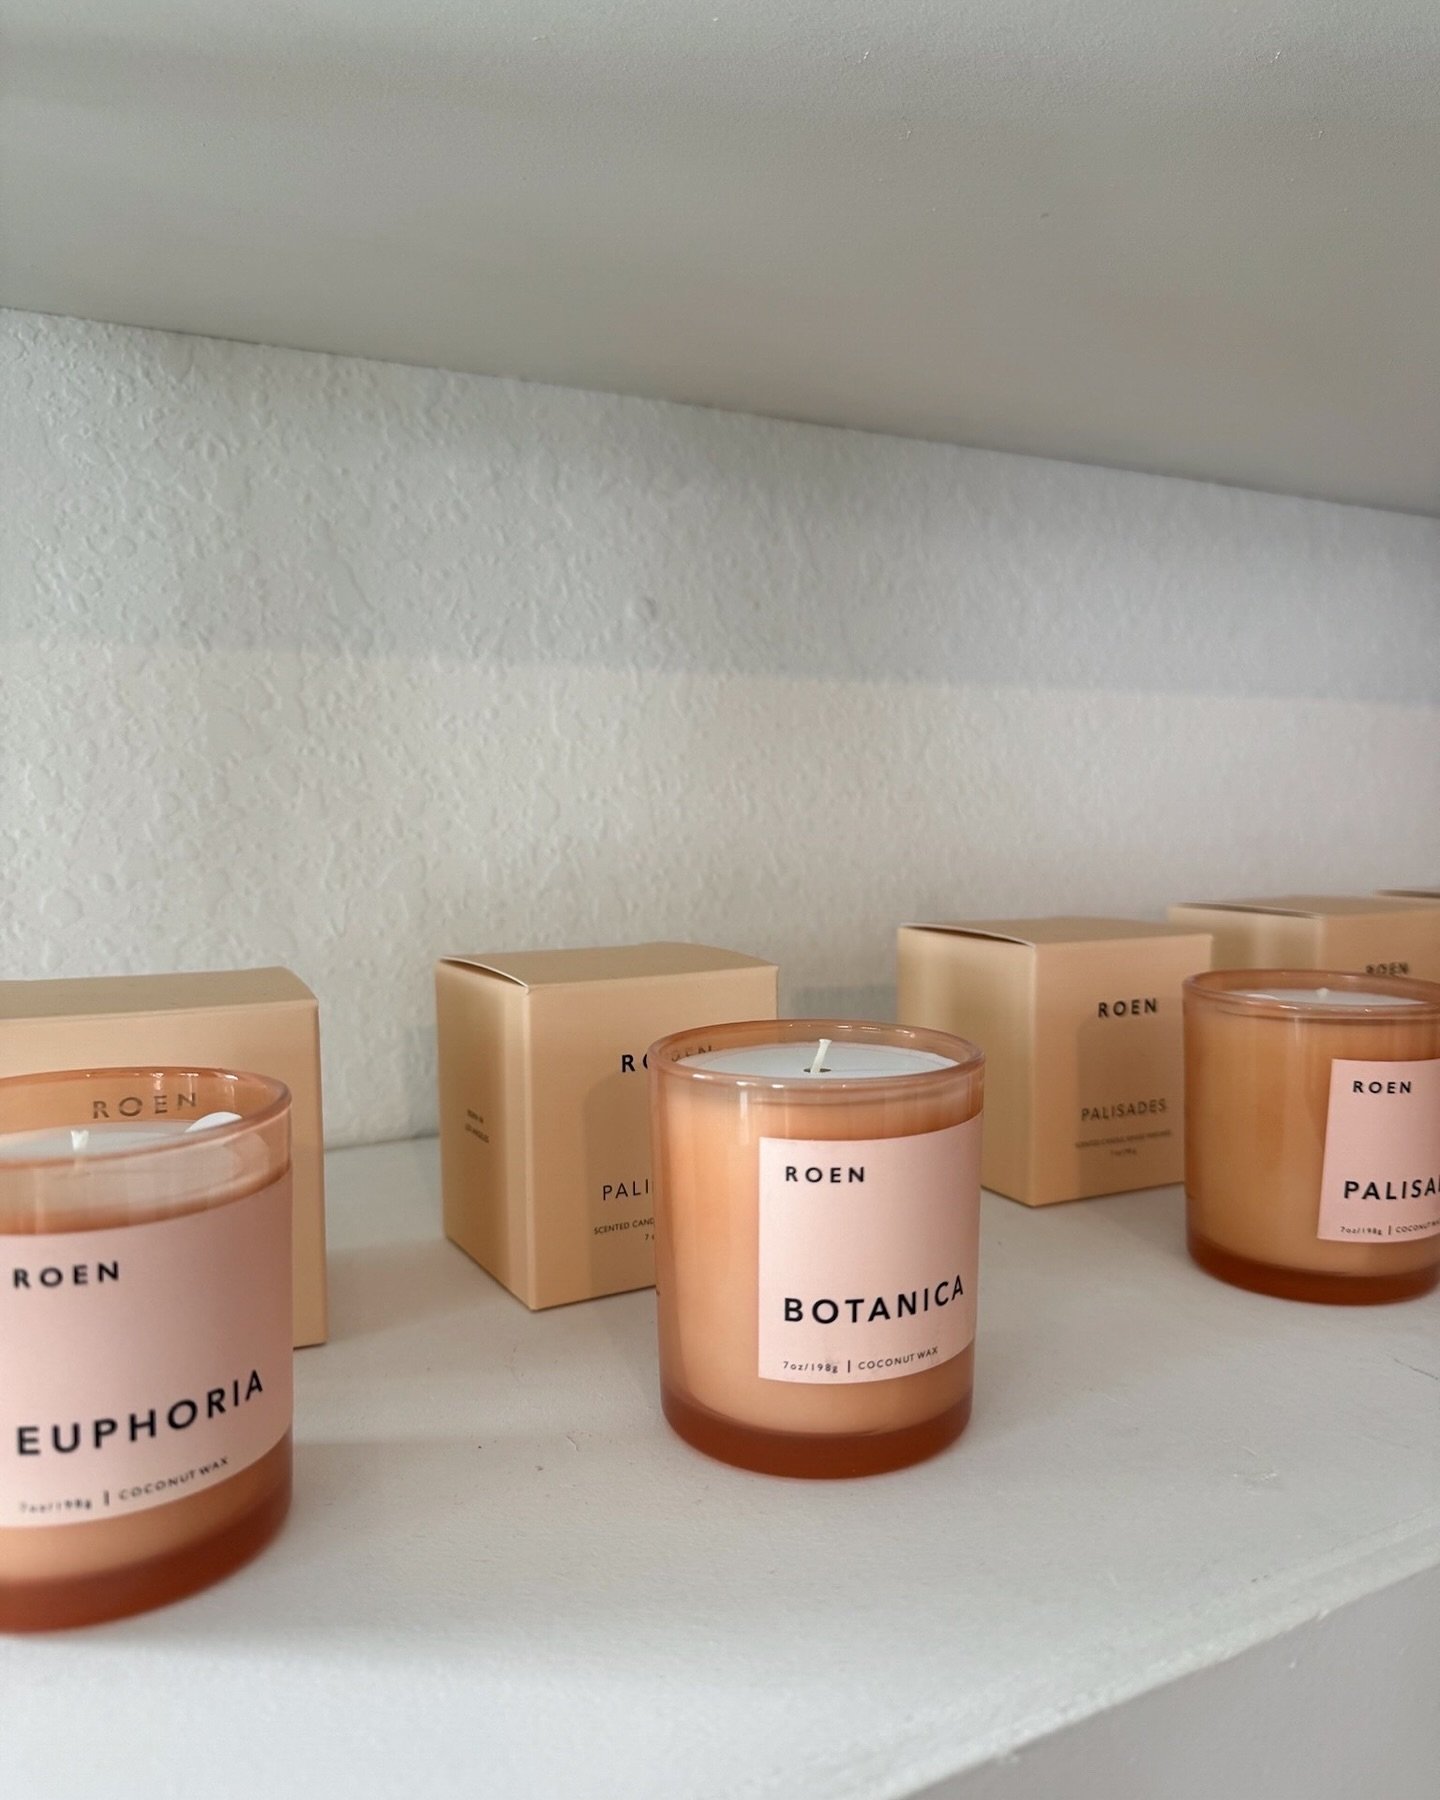 Just restocked our @roencandles collection! These have been favorites in the shop. Looking for the perfect spring scent? Check out Euphoria.